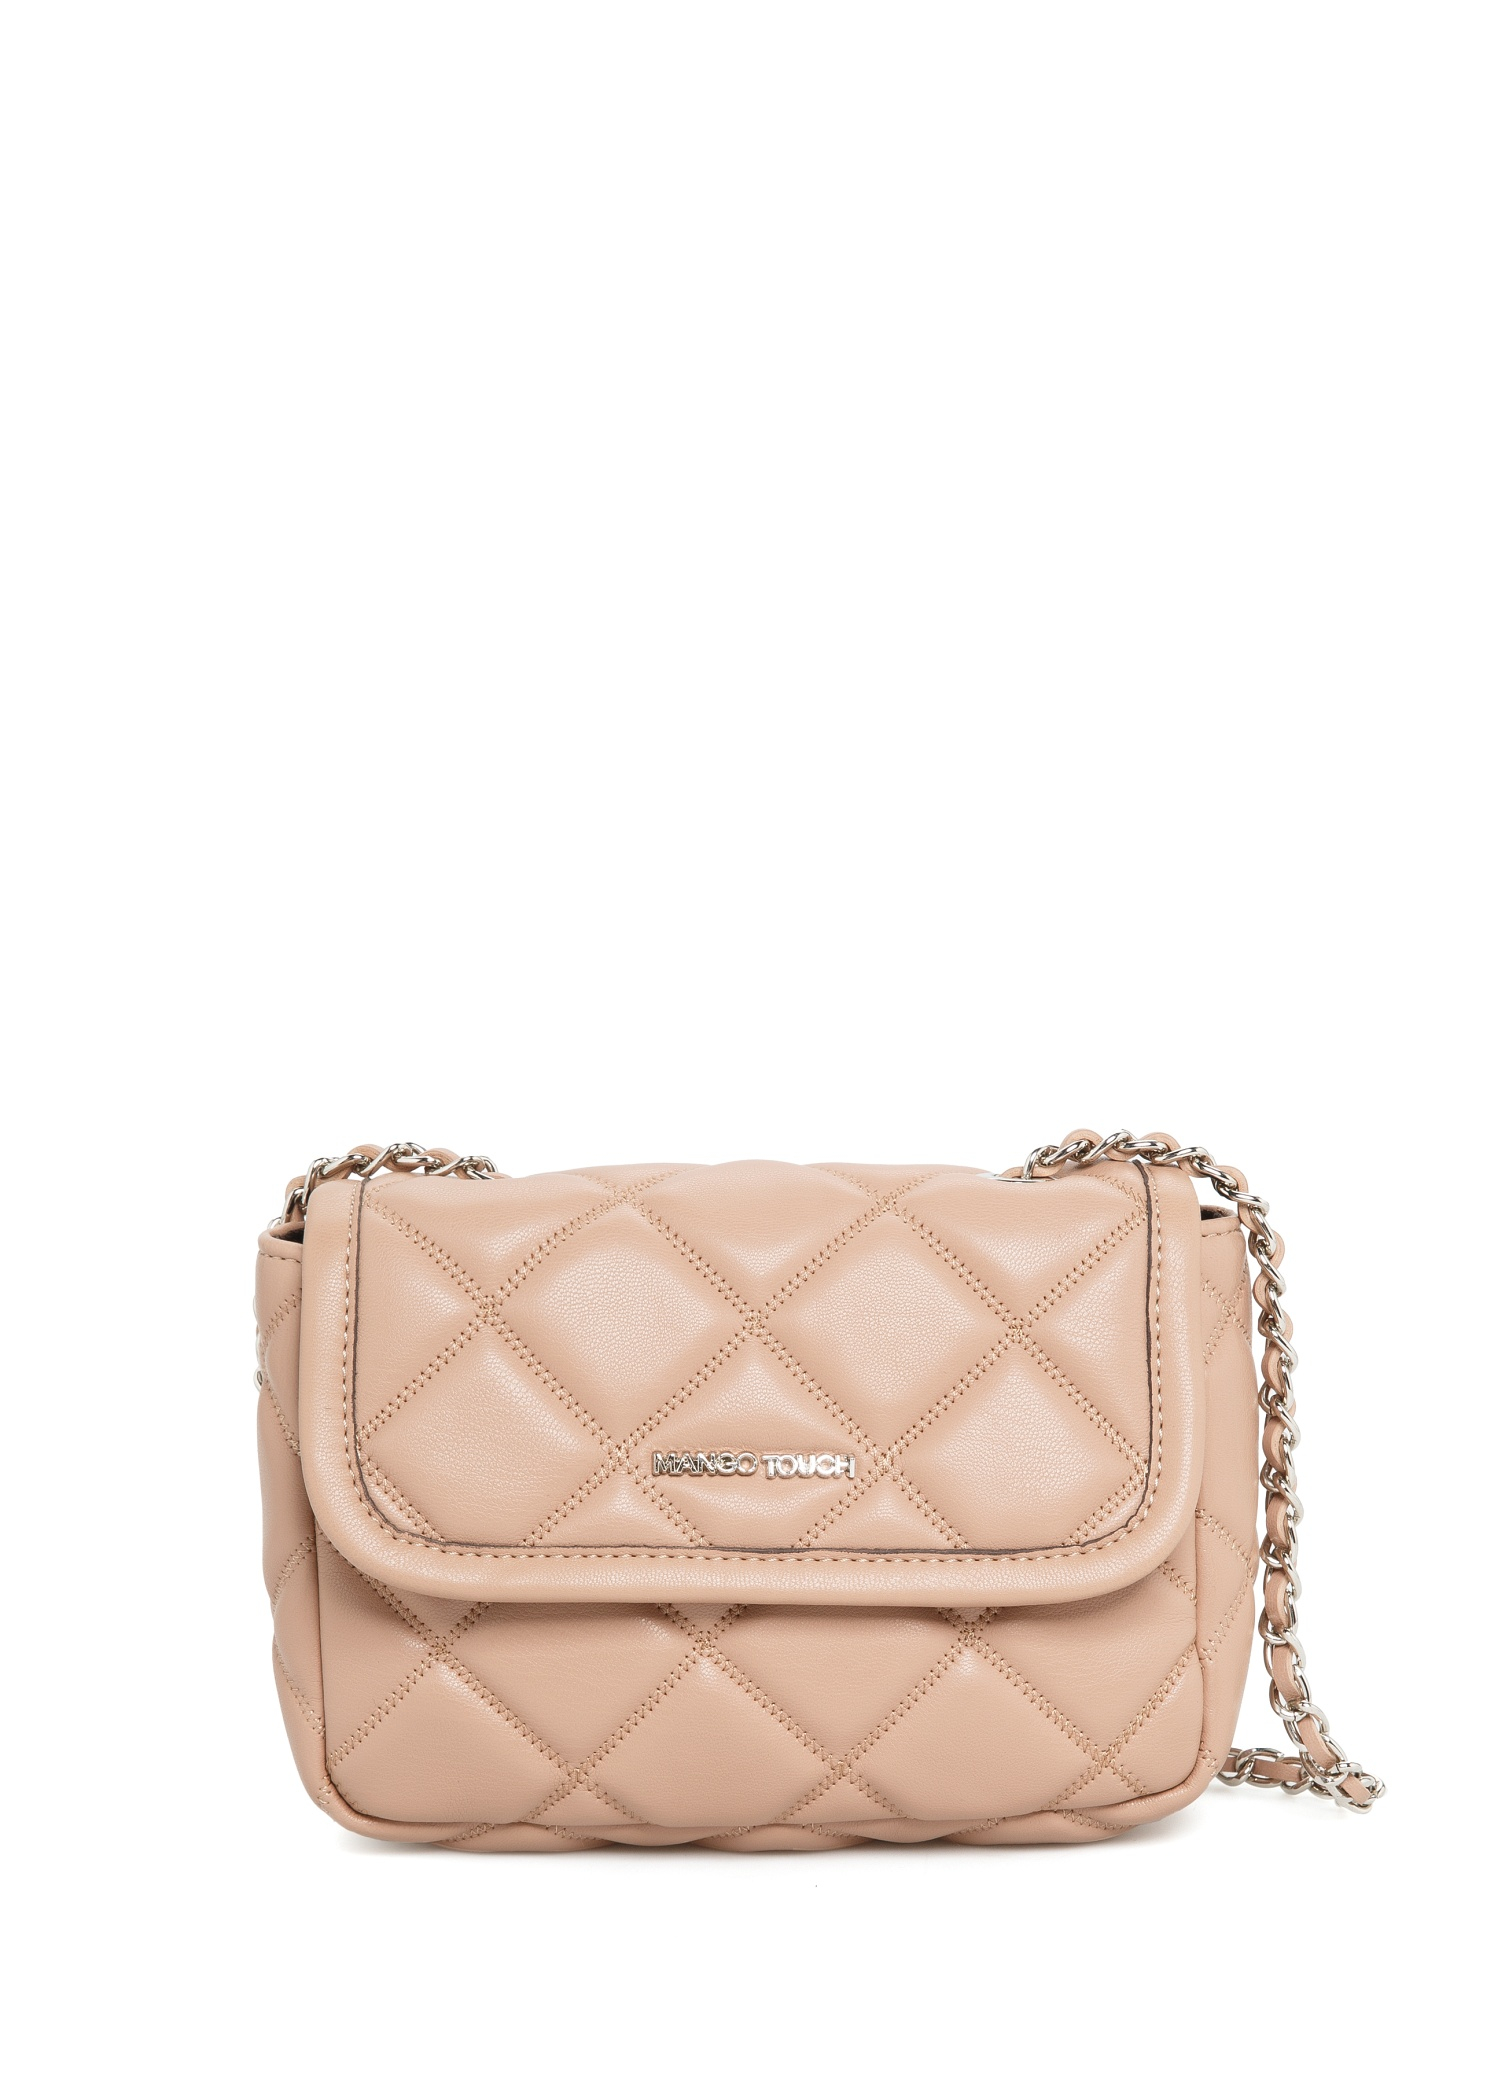 Mango Quilted Mini Crossbody Bag in Natural - Lyst